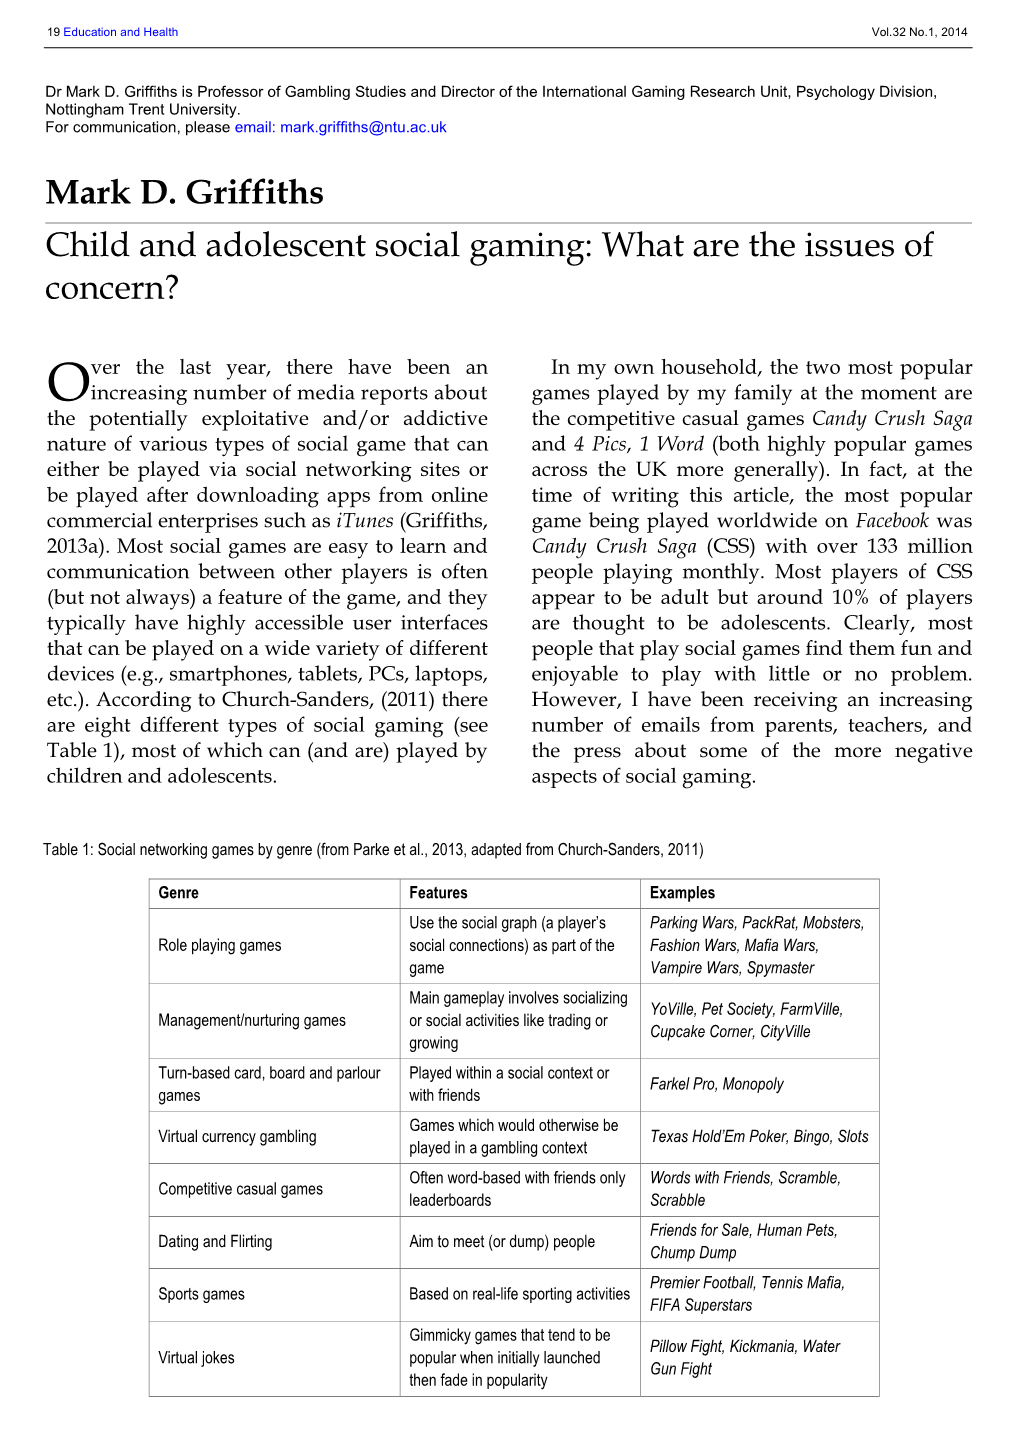 Mark D. Griffiths Child and Adolescent Social Gaming: What Are the Issues of Concern?